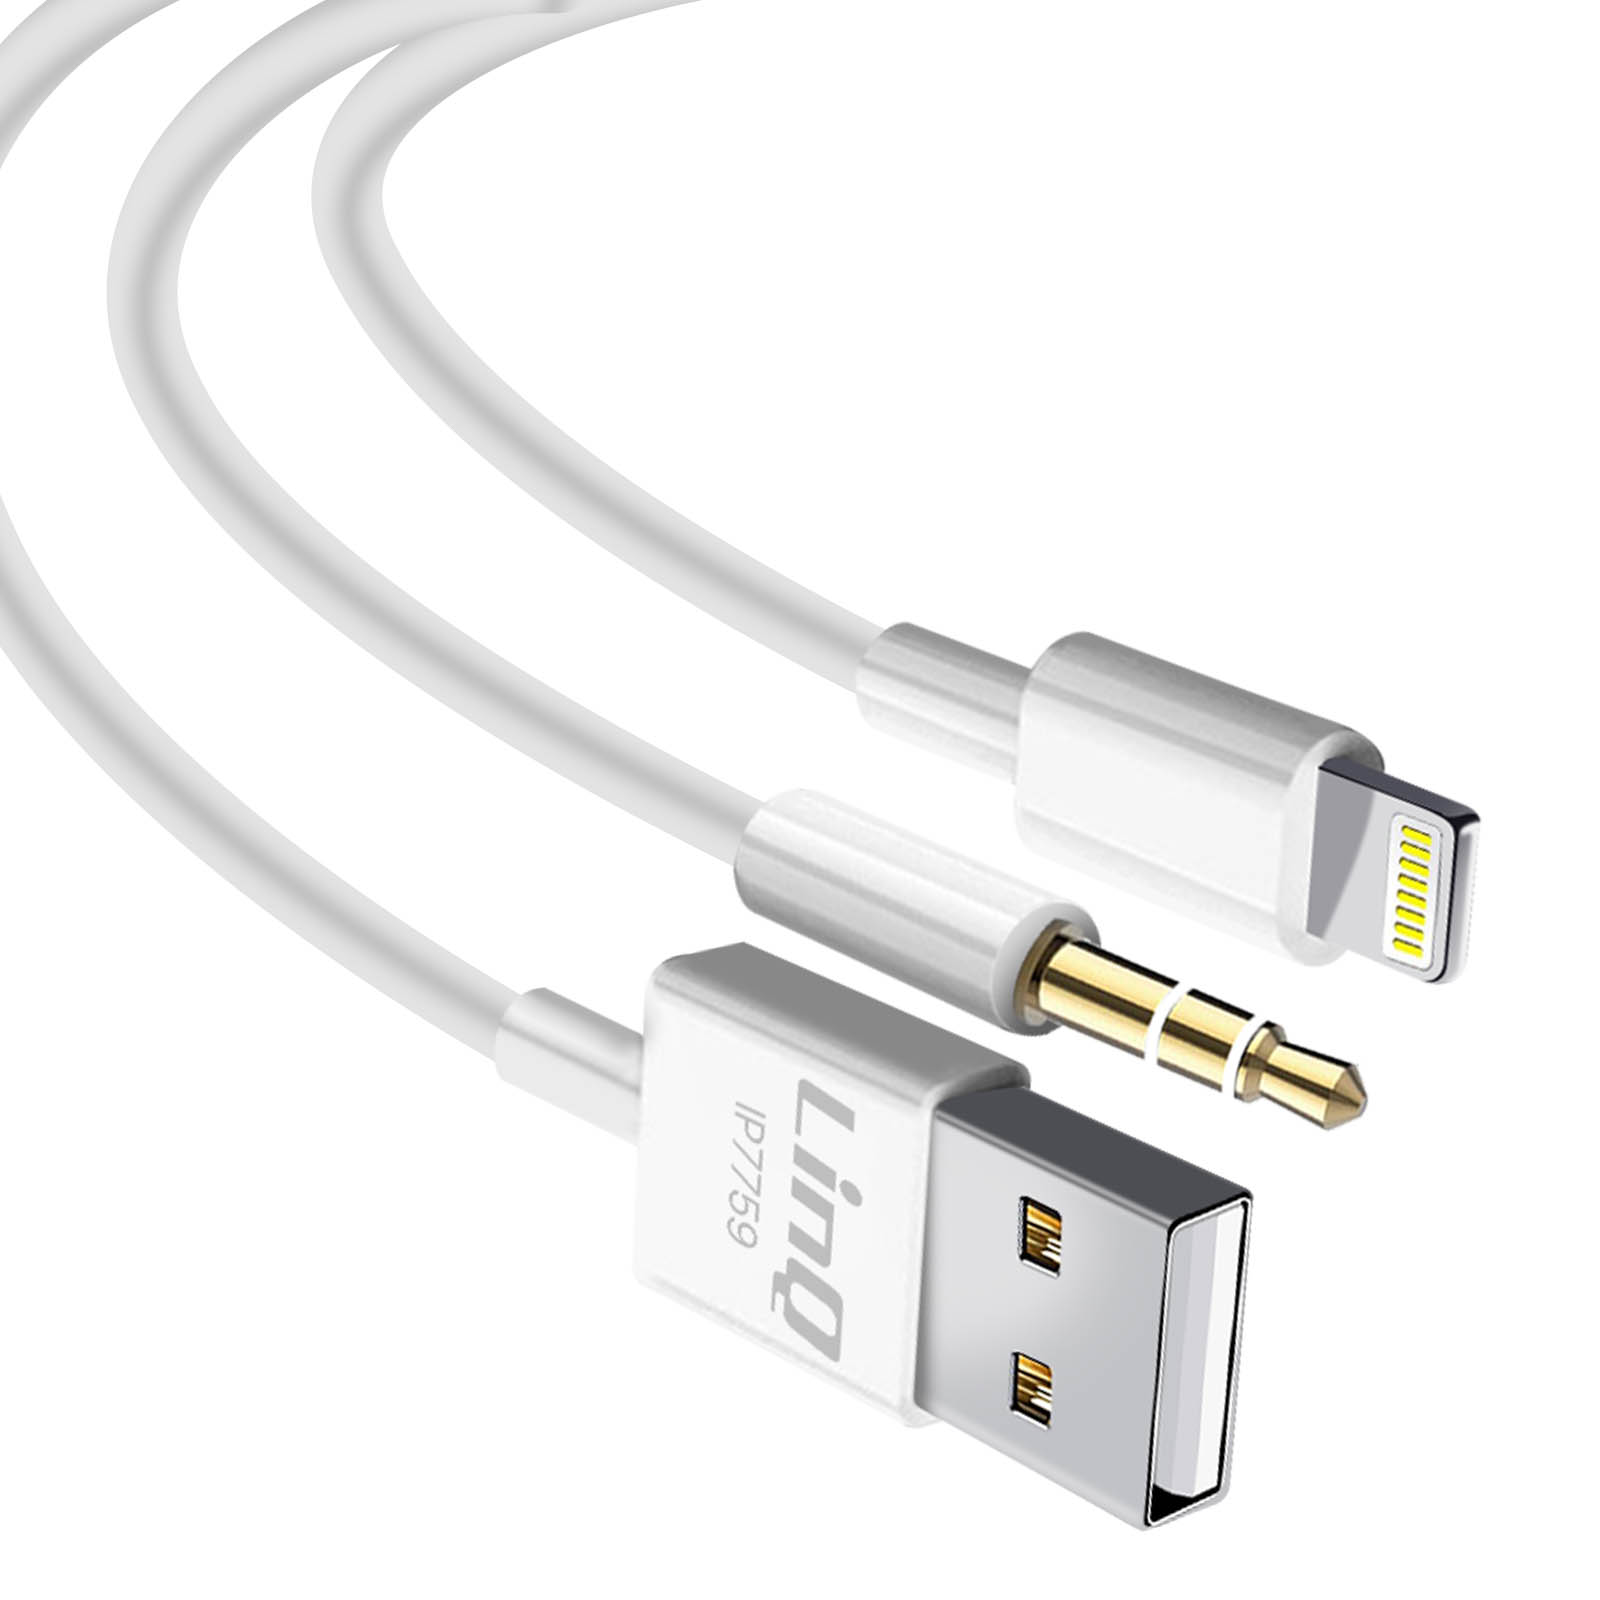 LINQ 7759 2-in-1 USB-Kabel